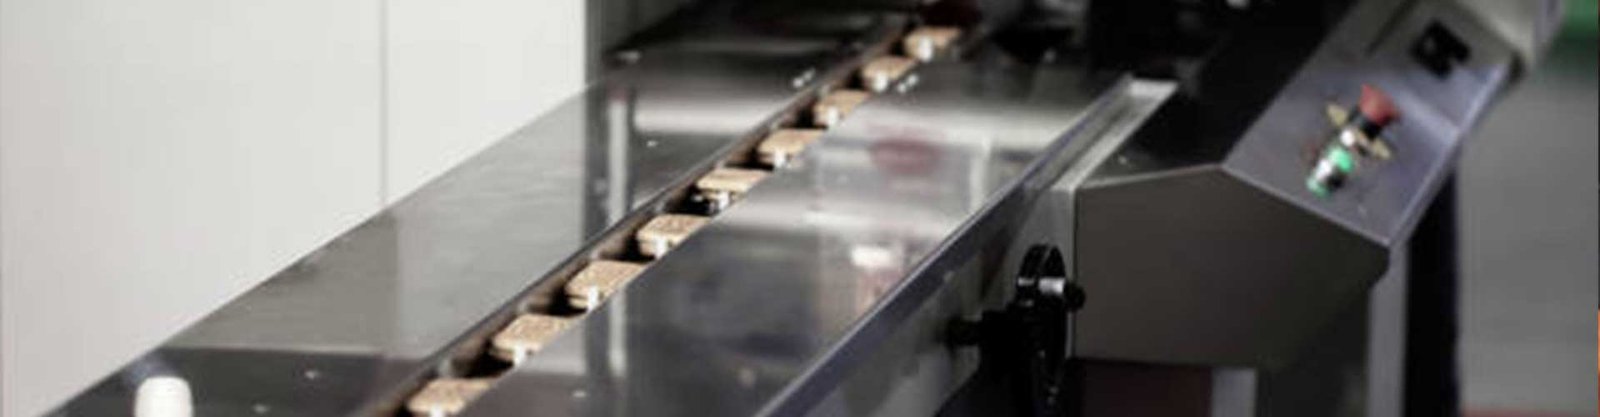 Food Packaging Equipment and Machine Supplier